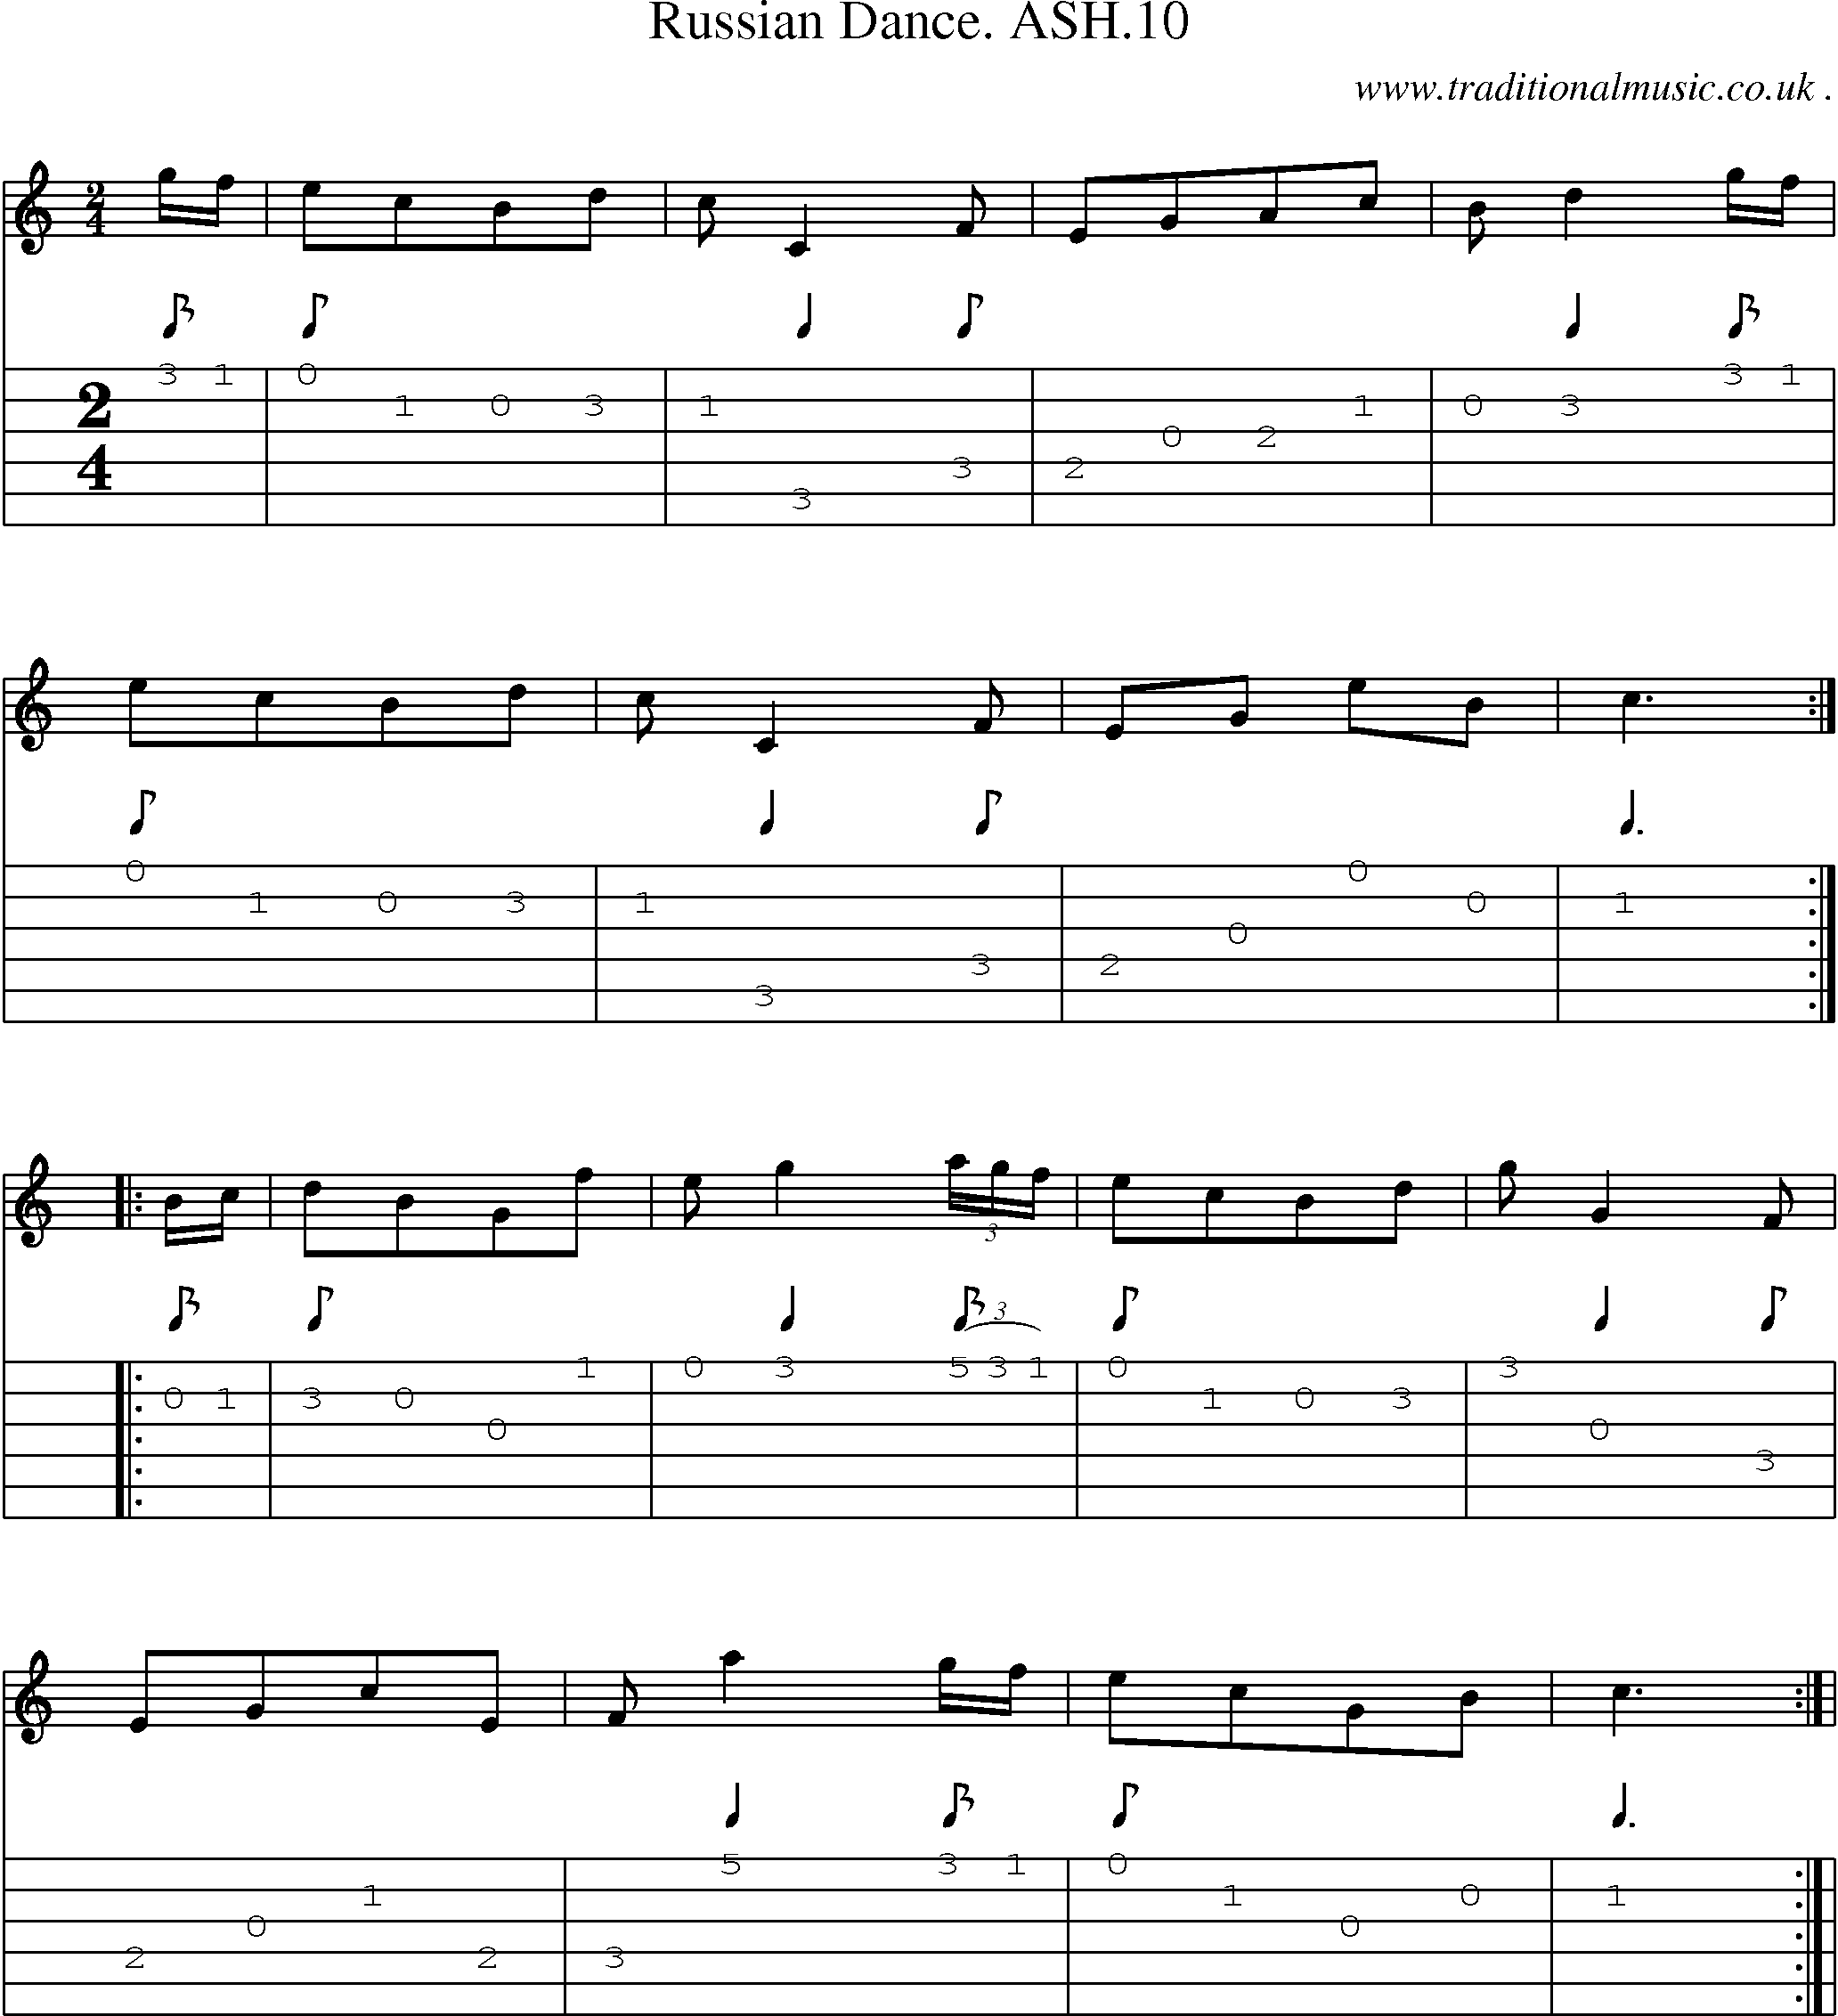 Sheet-Music and Guitar Tabs for Russian Dance Ash10